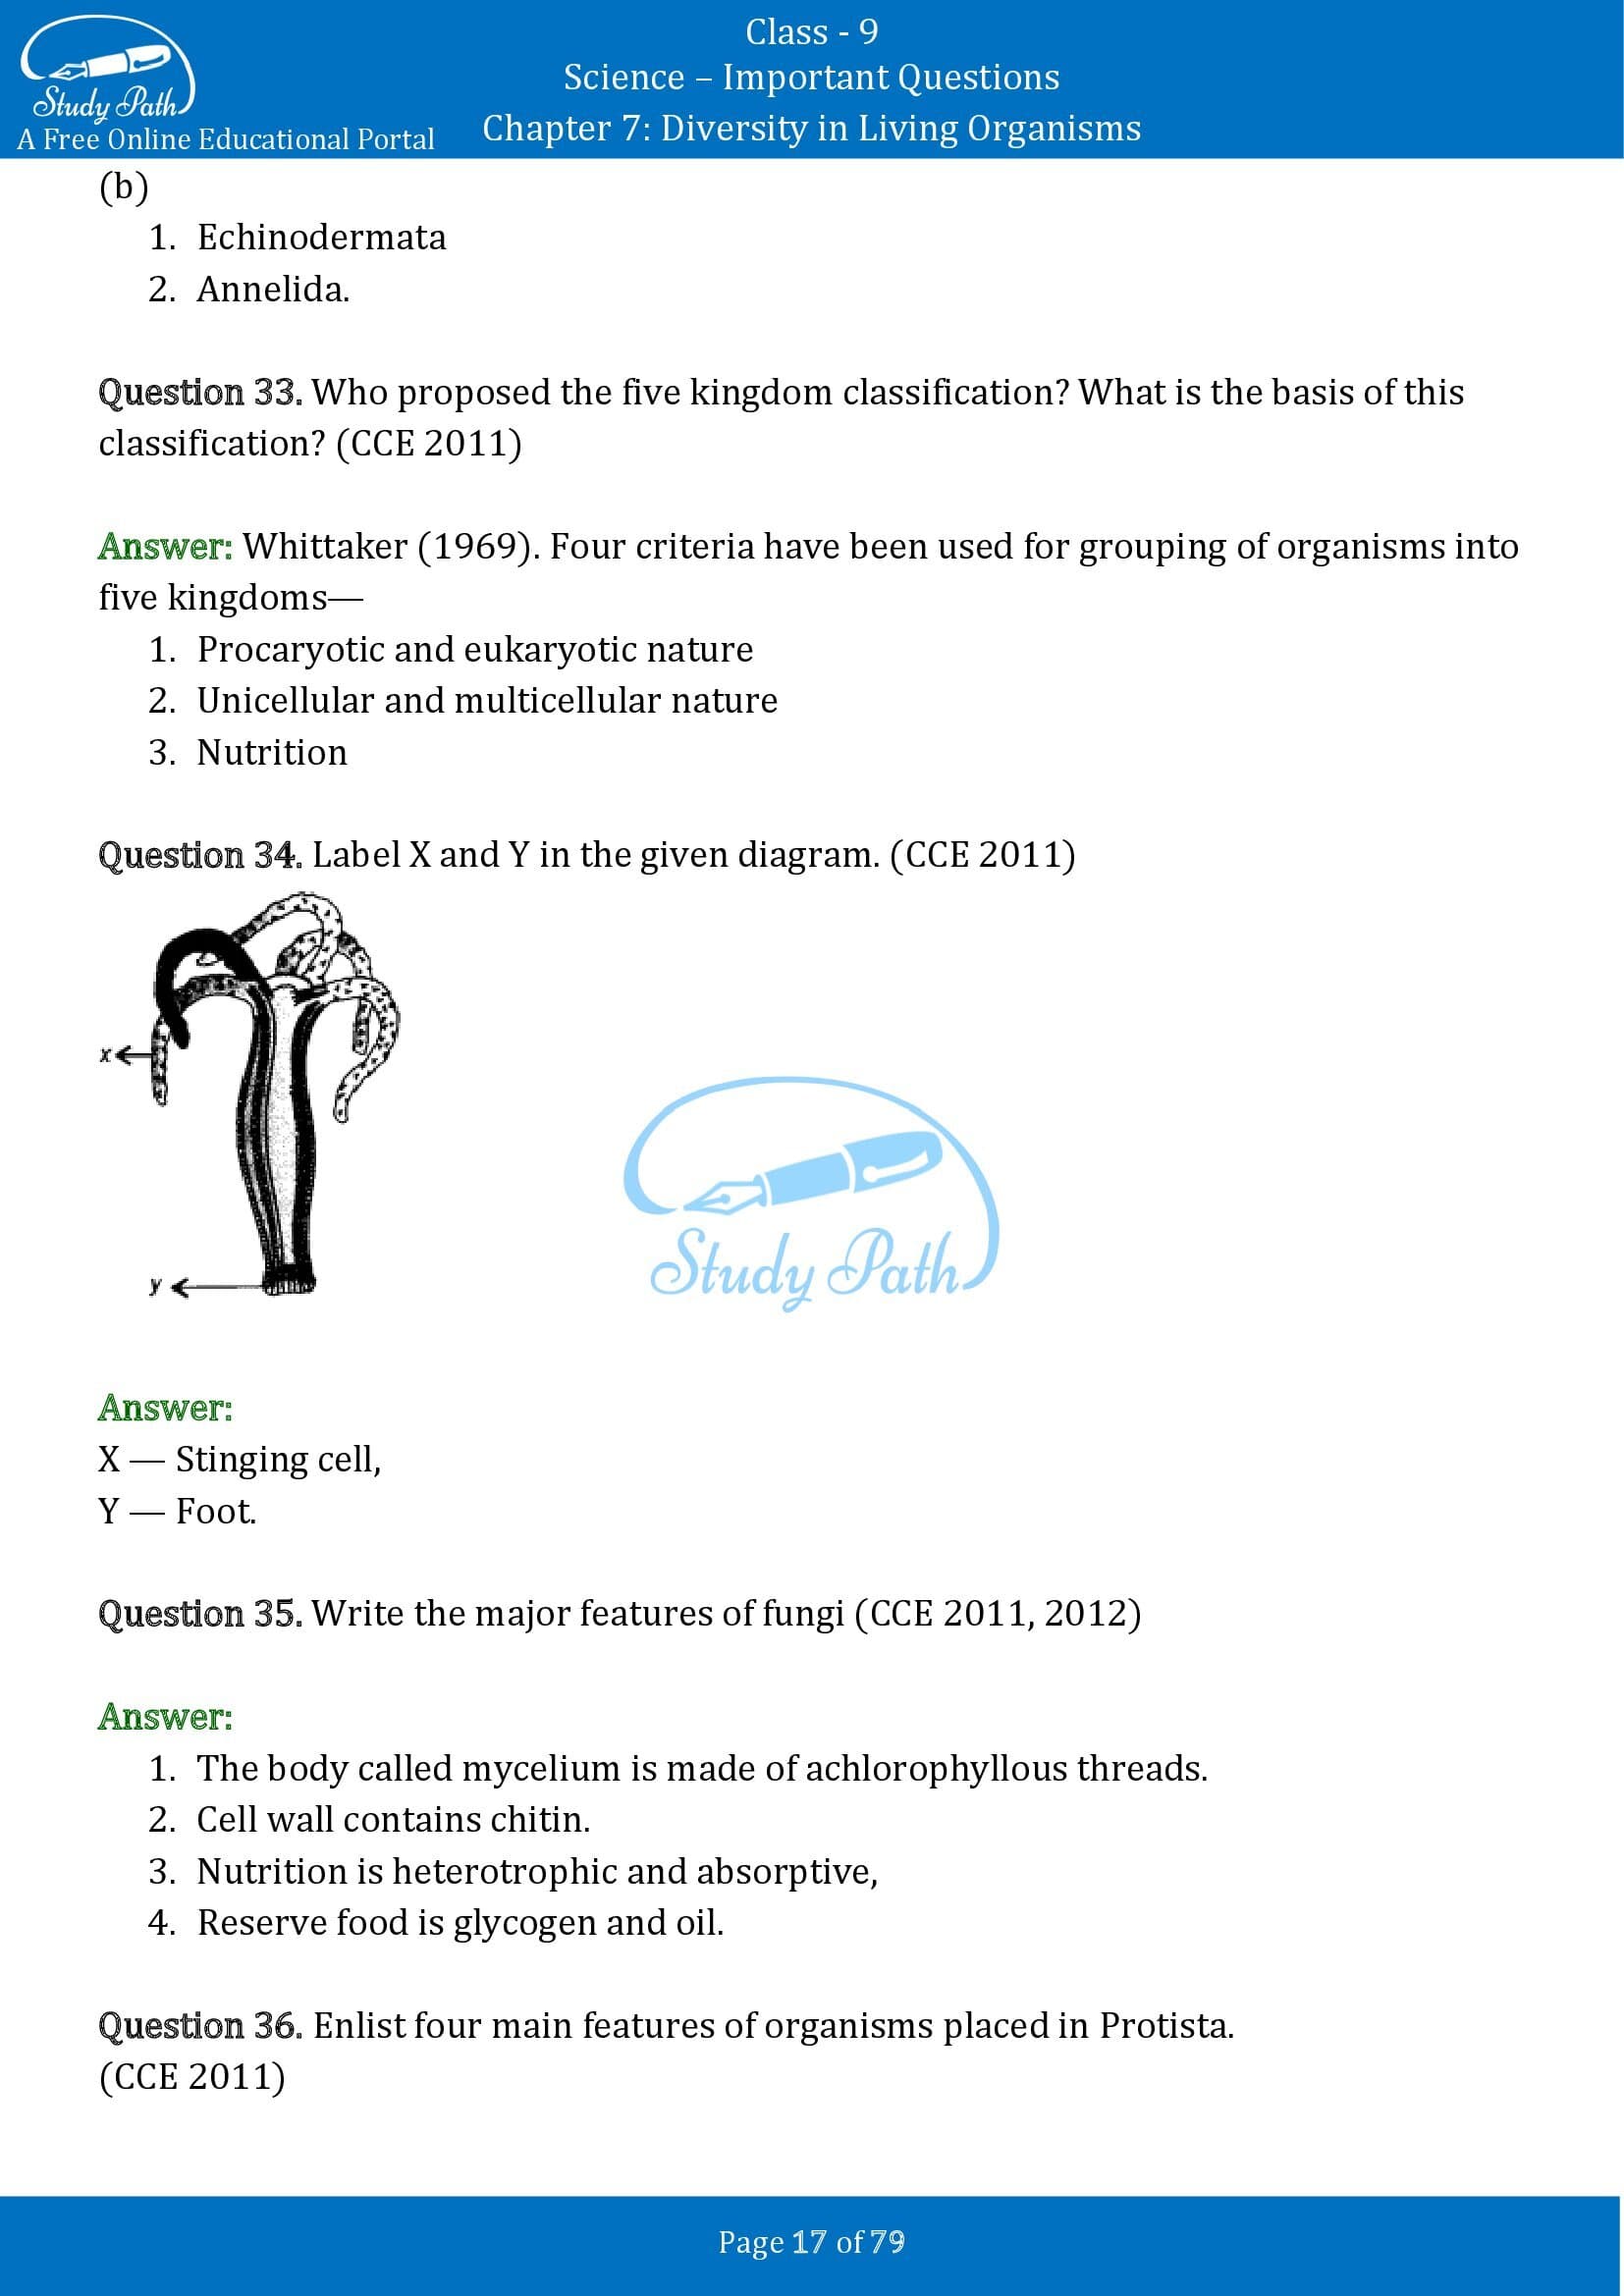 Important Questions for Class 9 Science Chapter 7 Diversity in Living Organisms 00017